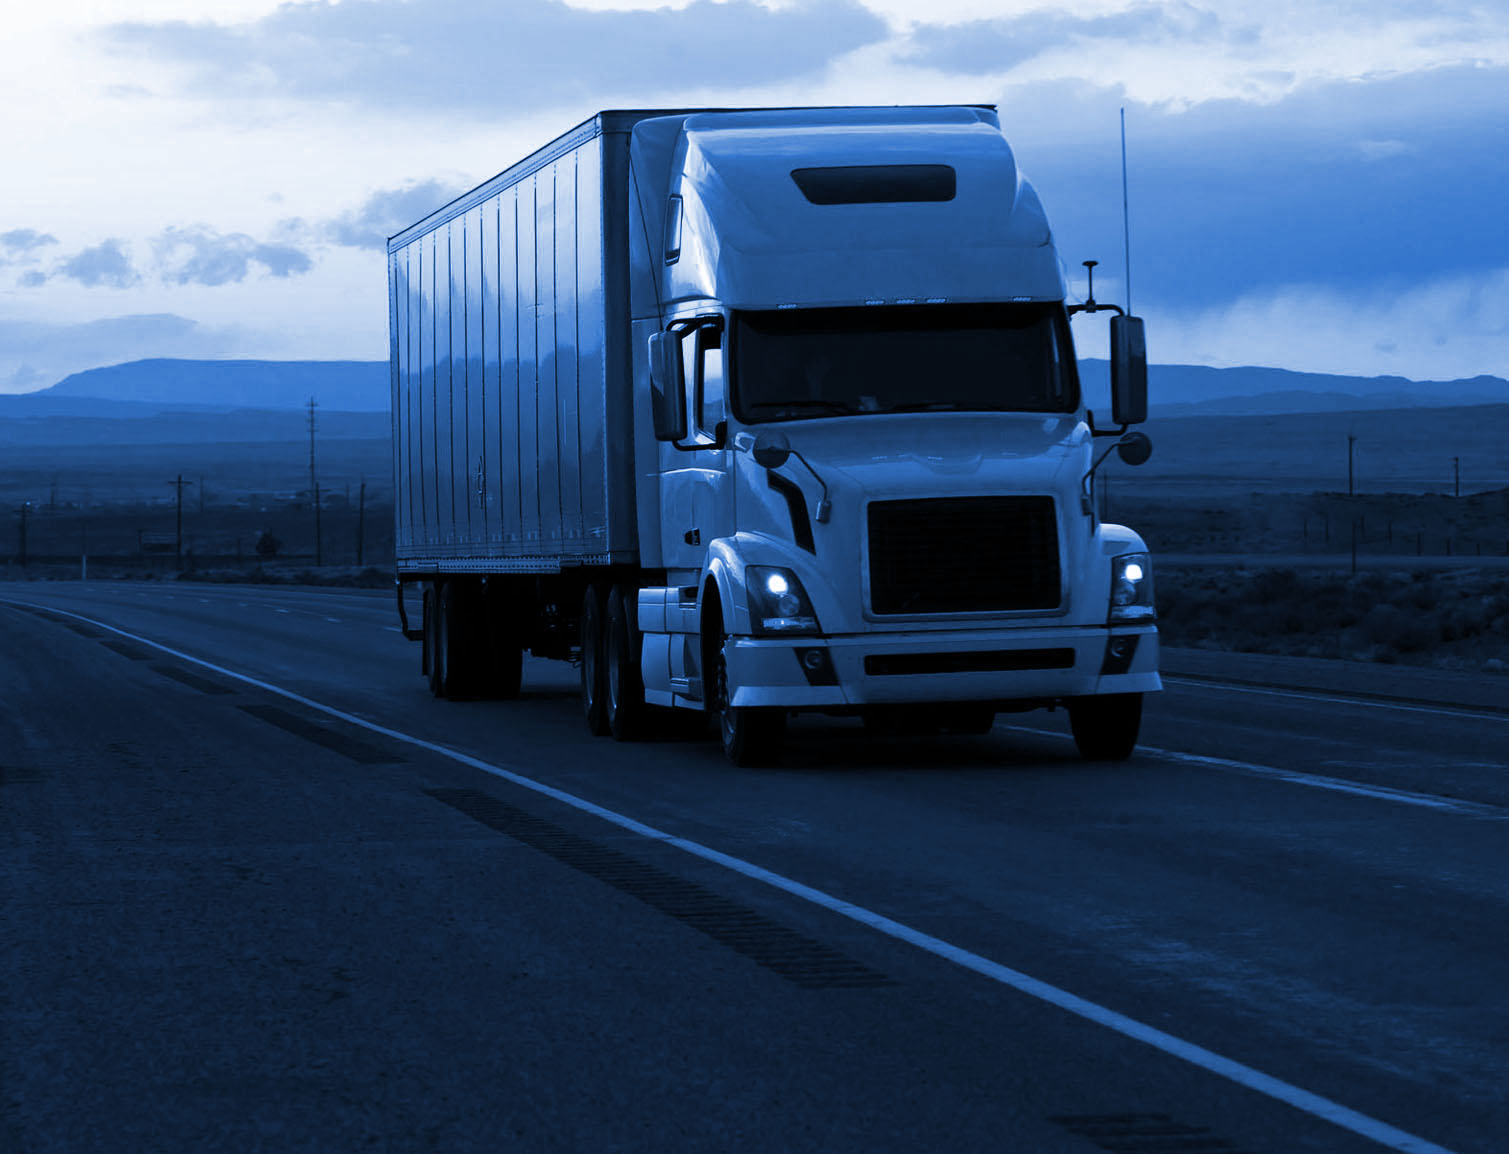 LOOKING TO HIRE CDL DRIVERS OR LOGISTICS PERSONNEL?